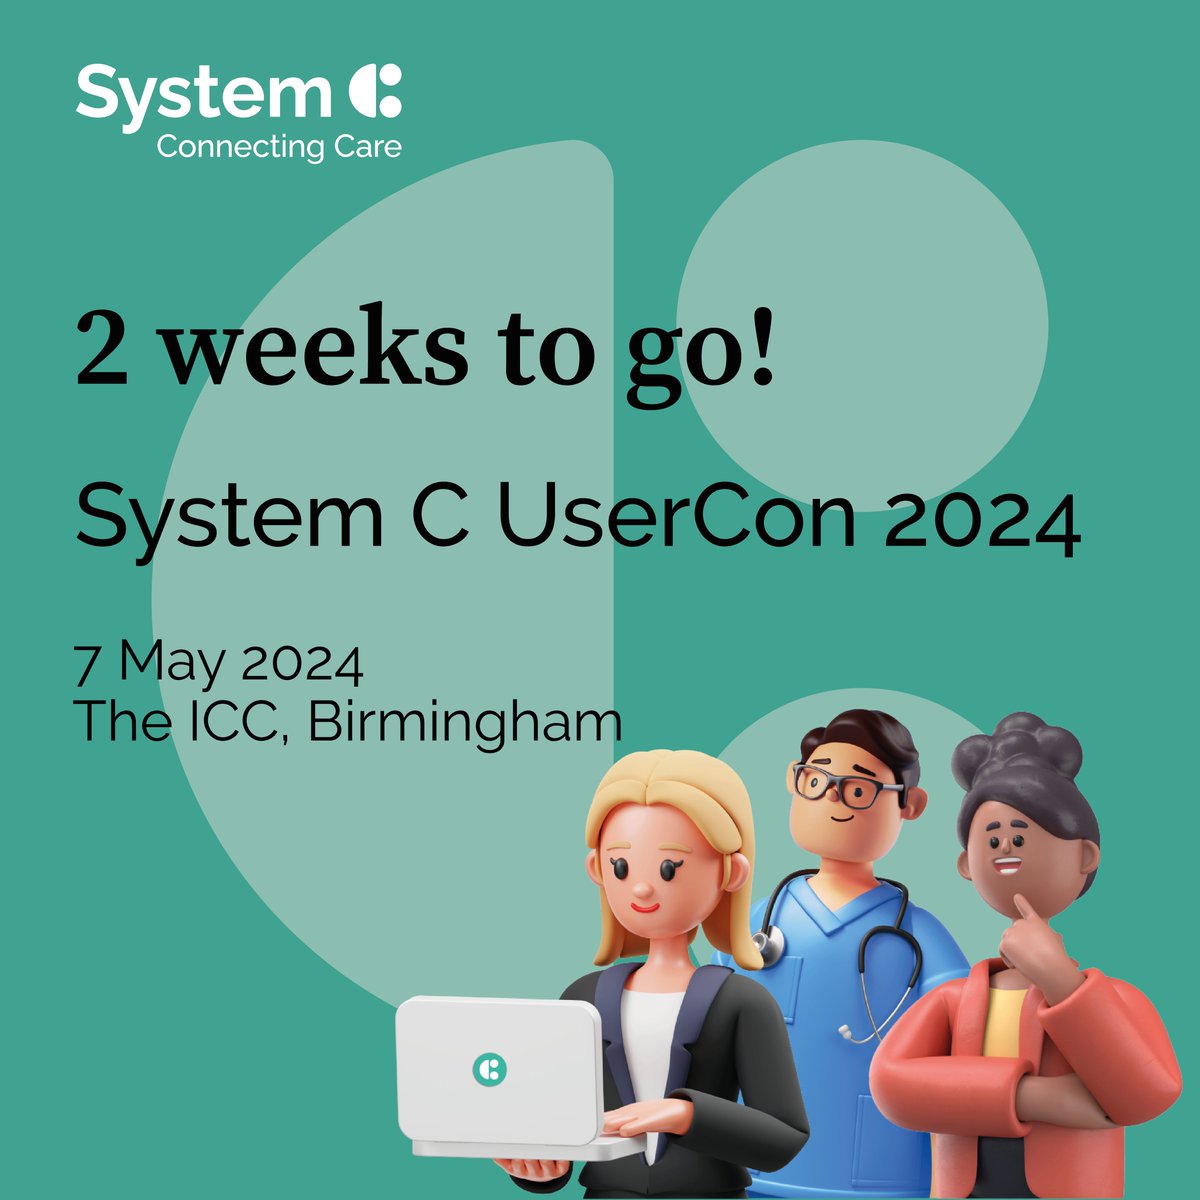 🚨 2 weeks to go!​ 🚨 Here's how to get ready for the day​: ✔️ Make sure you are registered​ bit.ly/4a3ZY1Y ✔️ Reserve your place in key sessions​ ✔️ Download the mobile event app​ ✔️ Tell everyone you are going to #SystemCUserCon2024!